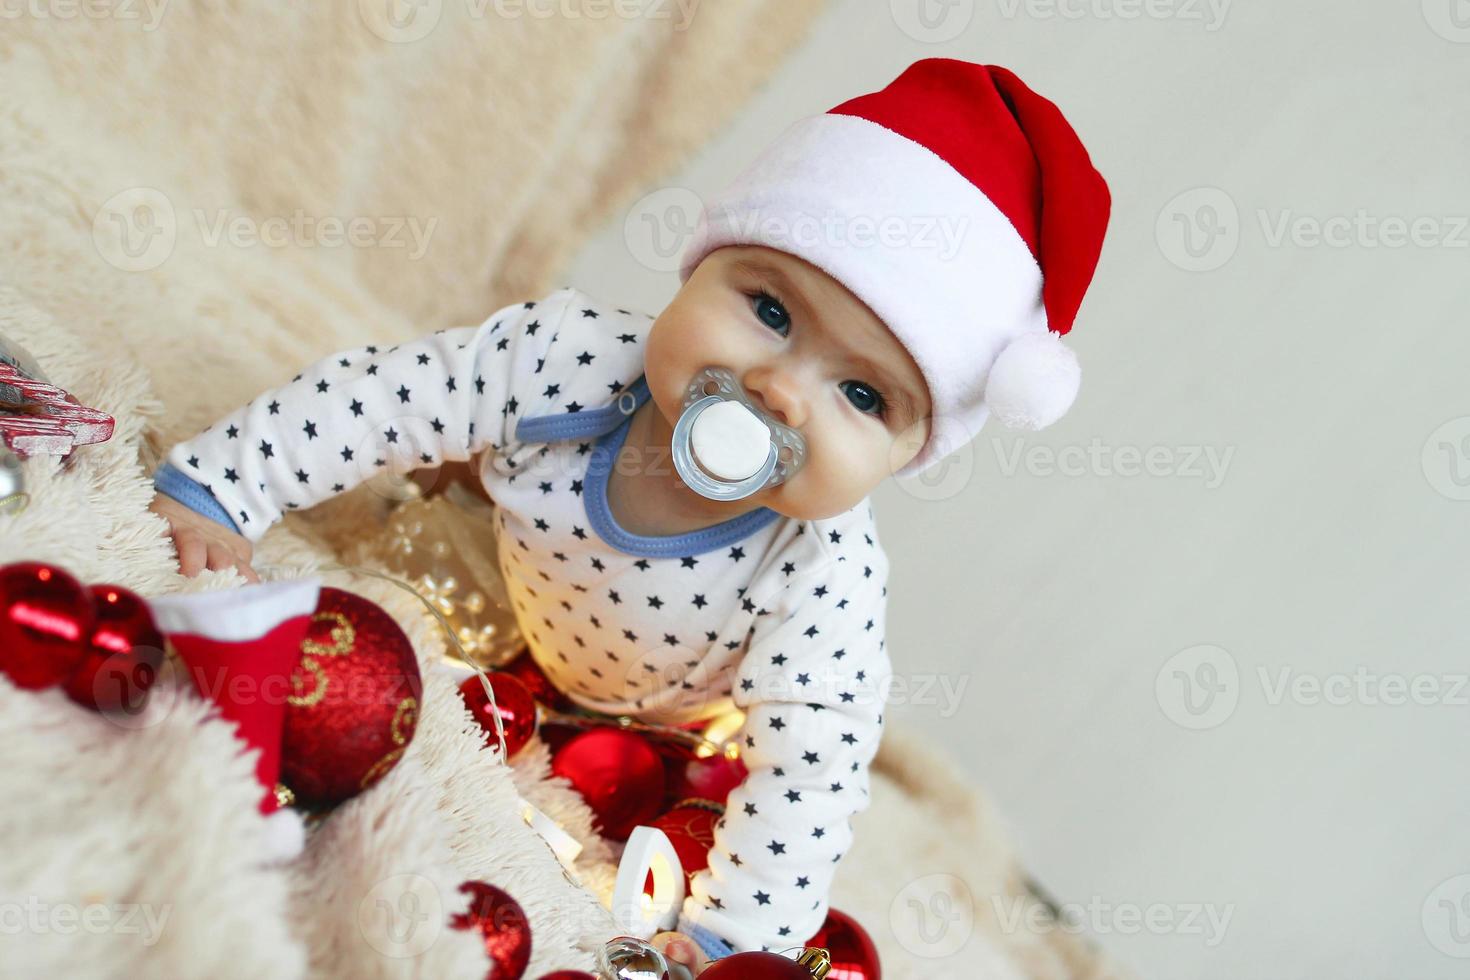 Cute little girl in Santa Claus red hat with pacifier is playing with red and white Christmas decorations and Christmas lights on a beige plaid. photo